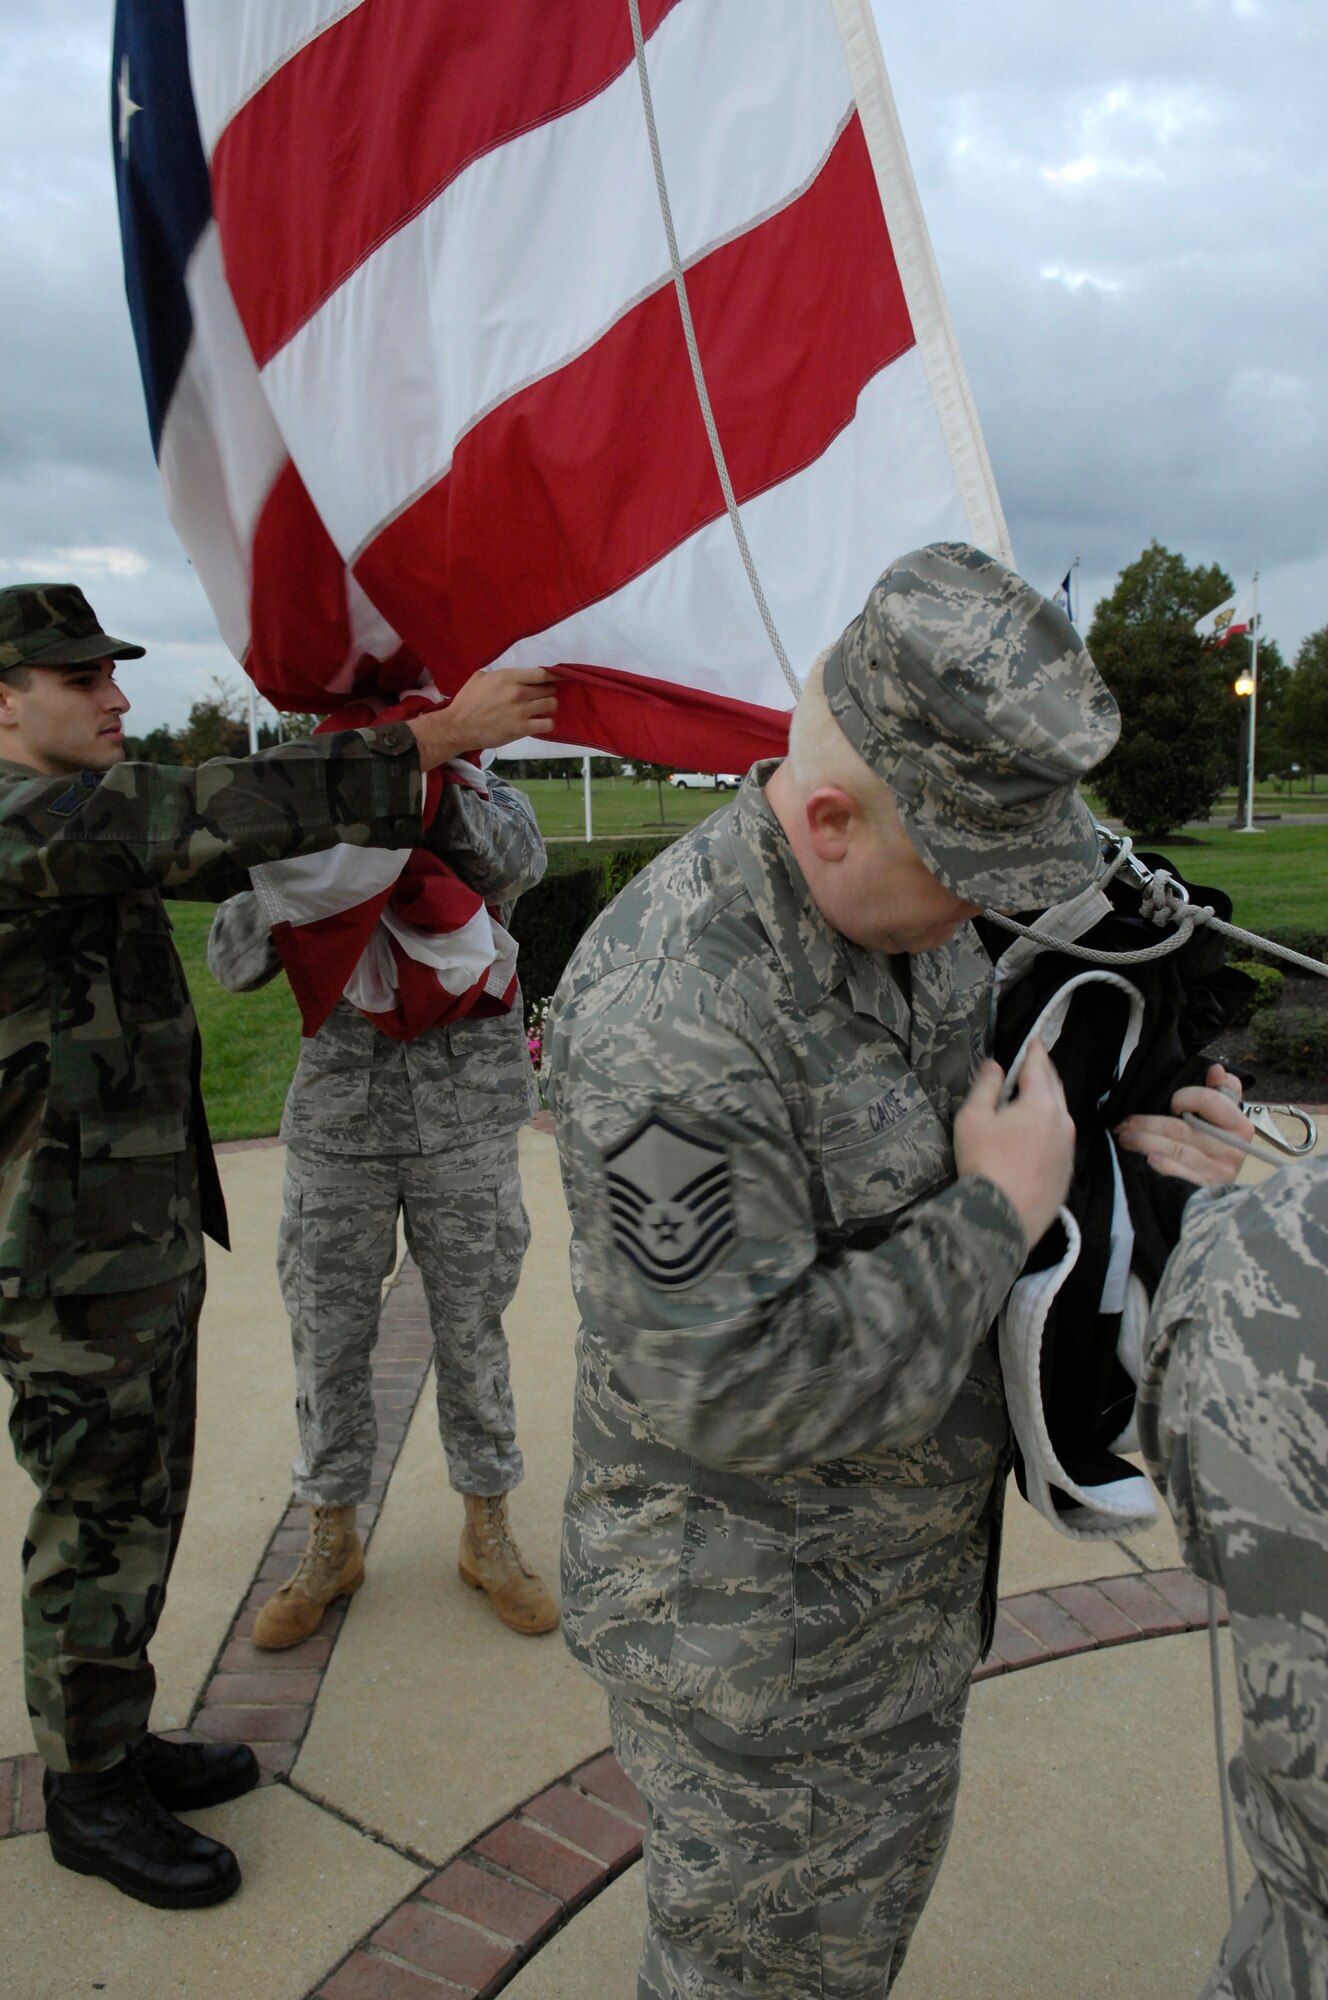 Airmen from the National Capital Region attach a POW/MIA flag Sept. 19 to the flagpole on Bolling. The flag was attached during a reveille ceremony as part of the National POW/MIA Day. (U.S. Air Force Photo by Senior Airman Dan DeCook)